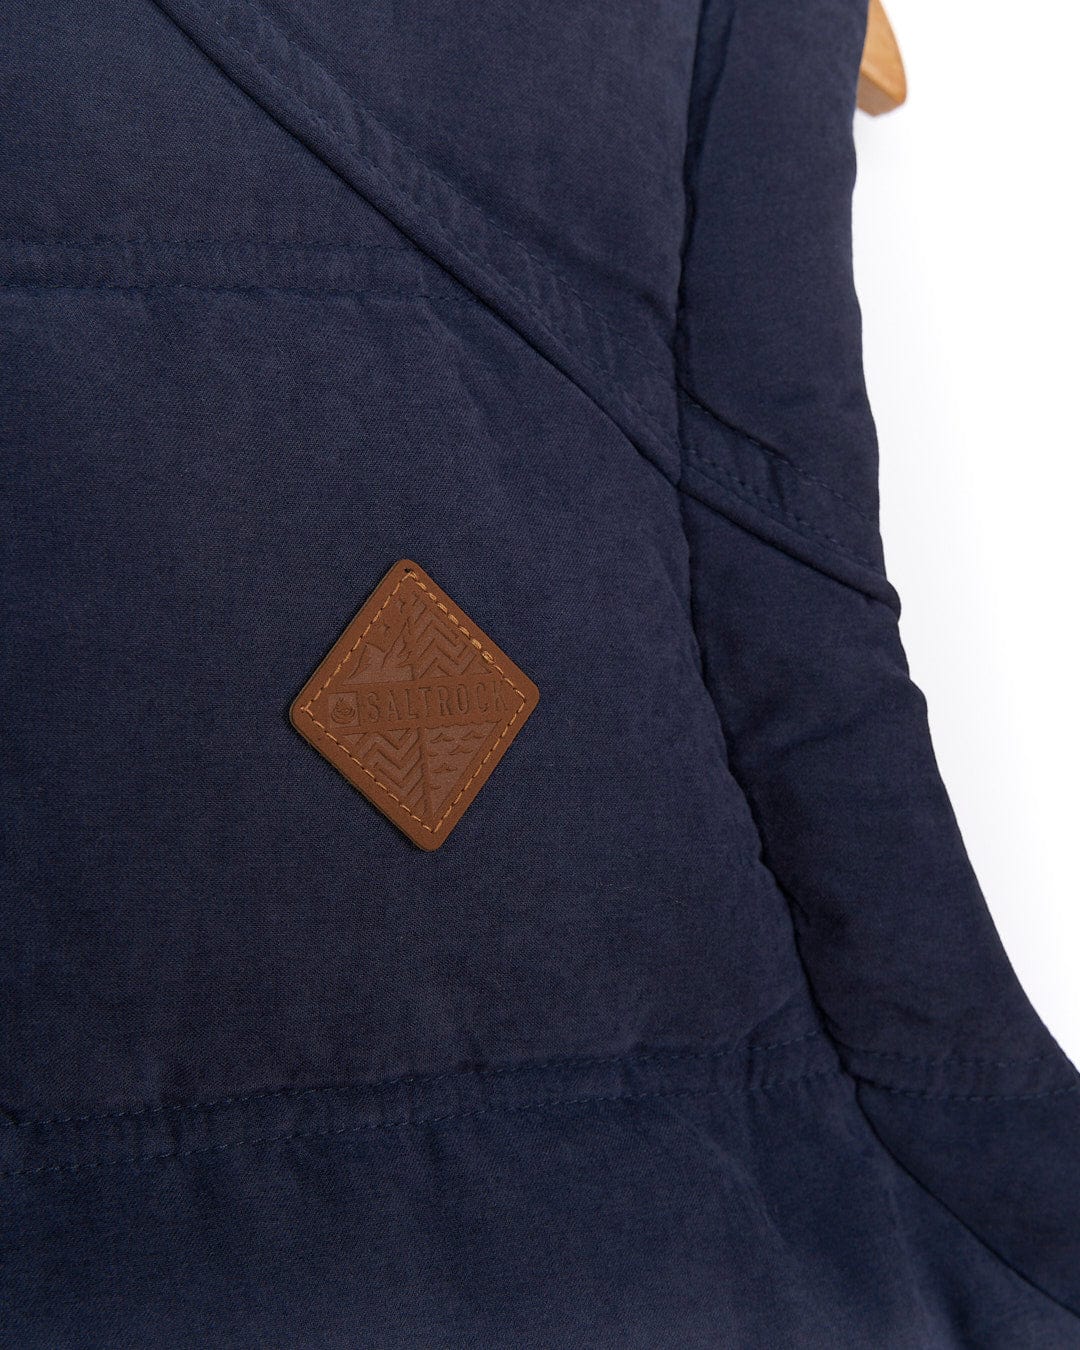 A Bardsey - Mens Gilet - Blue with a leather patch on it. Brand: Saltrock